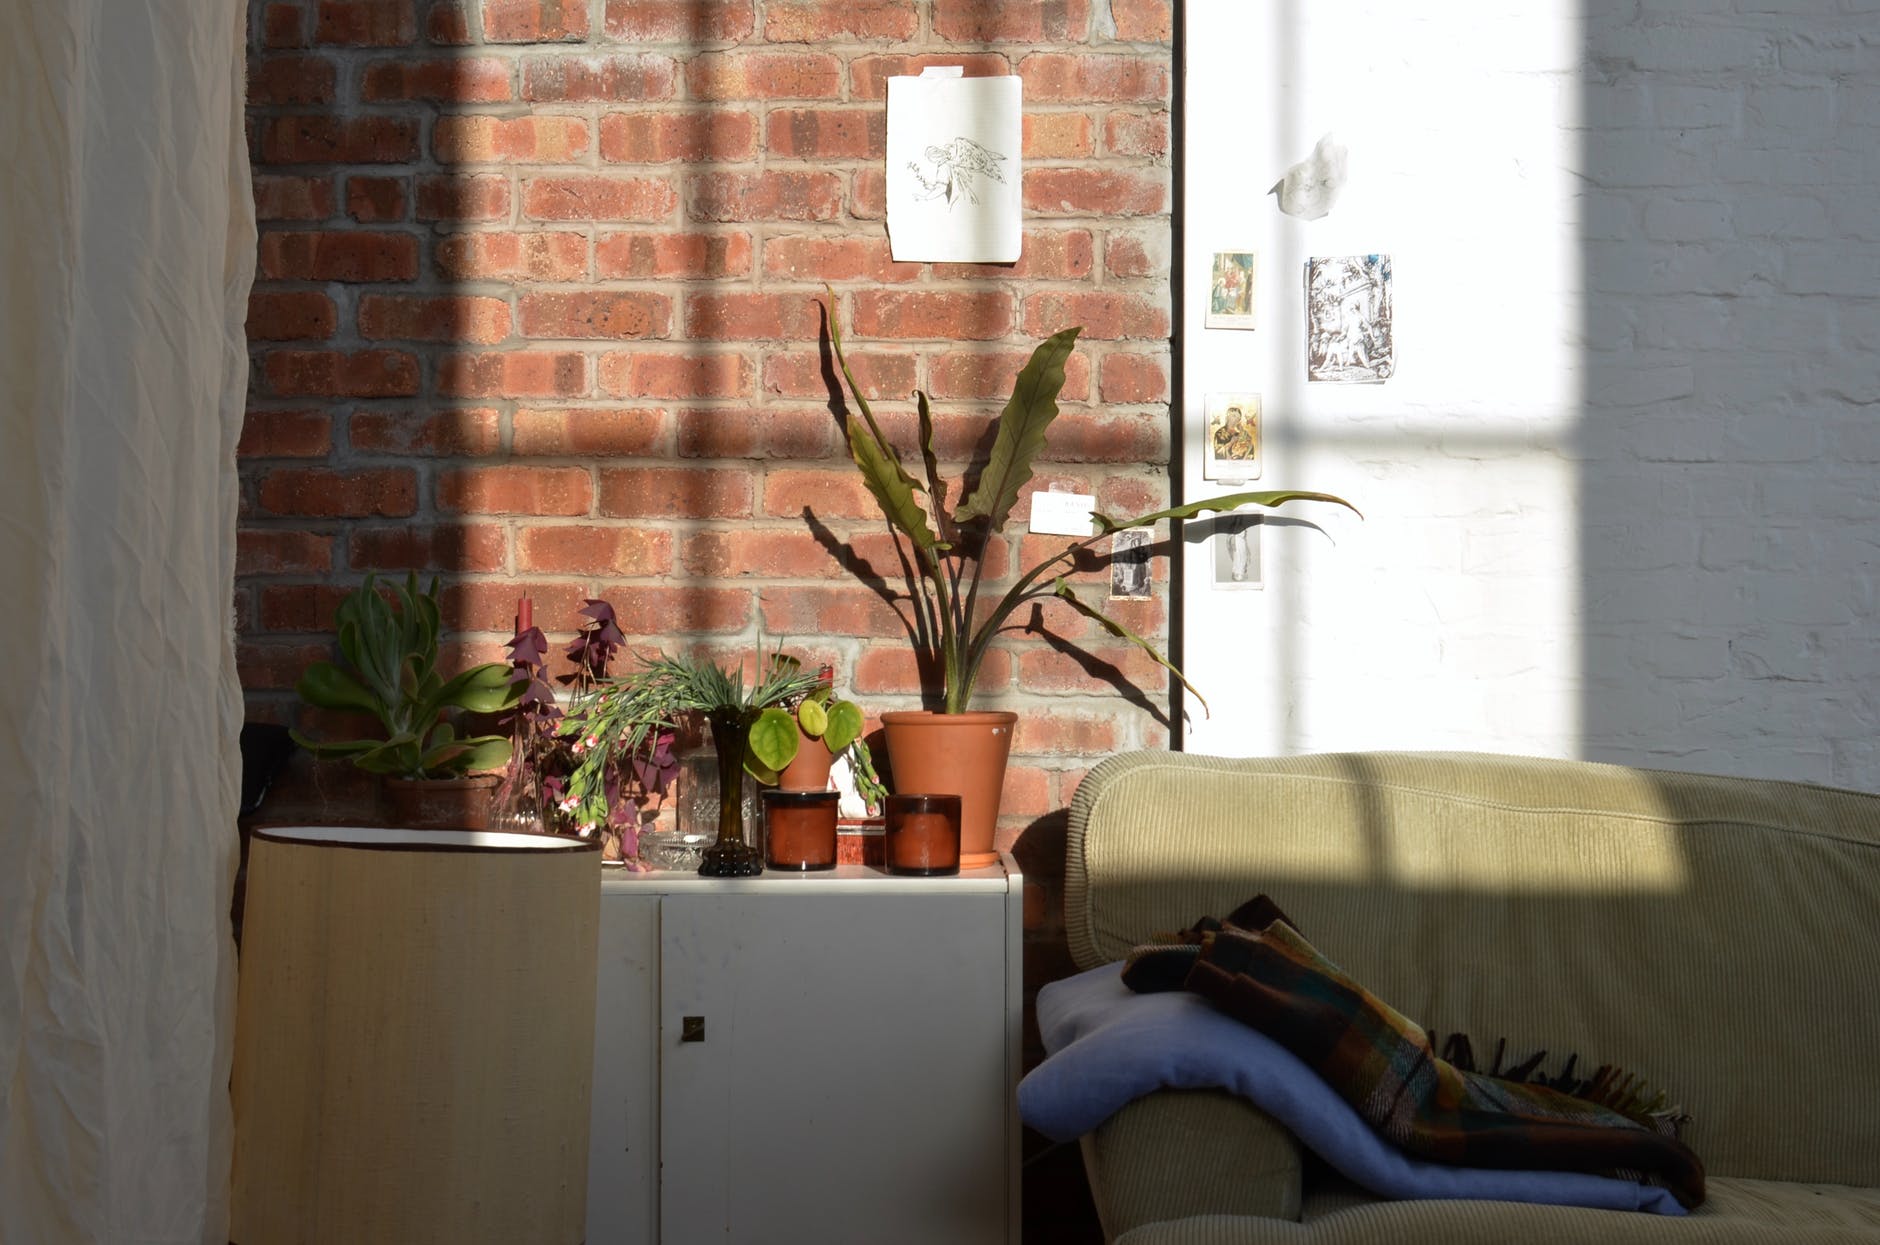 interior of apartment with potted plants on cupboard near sofa